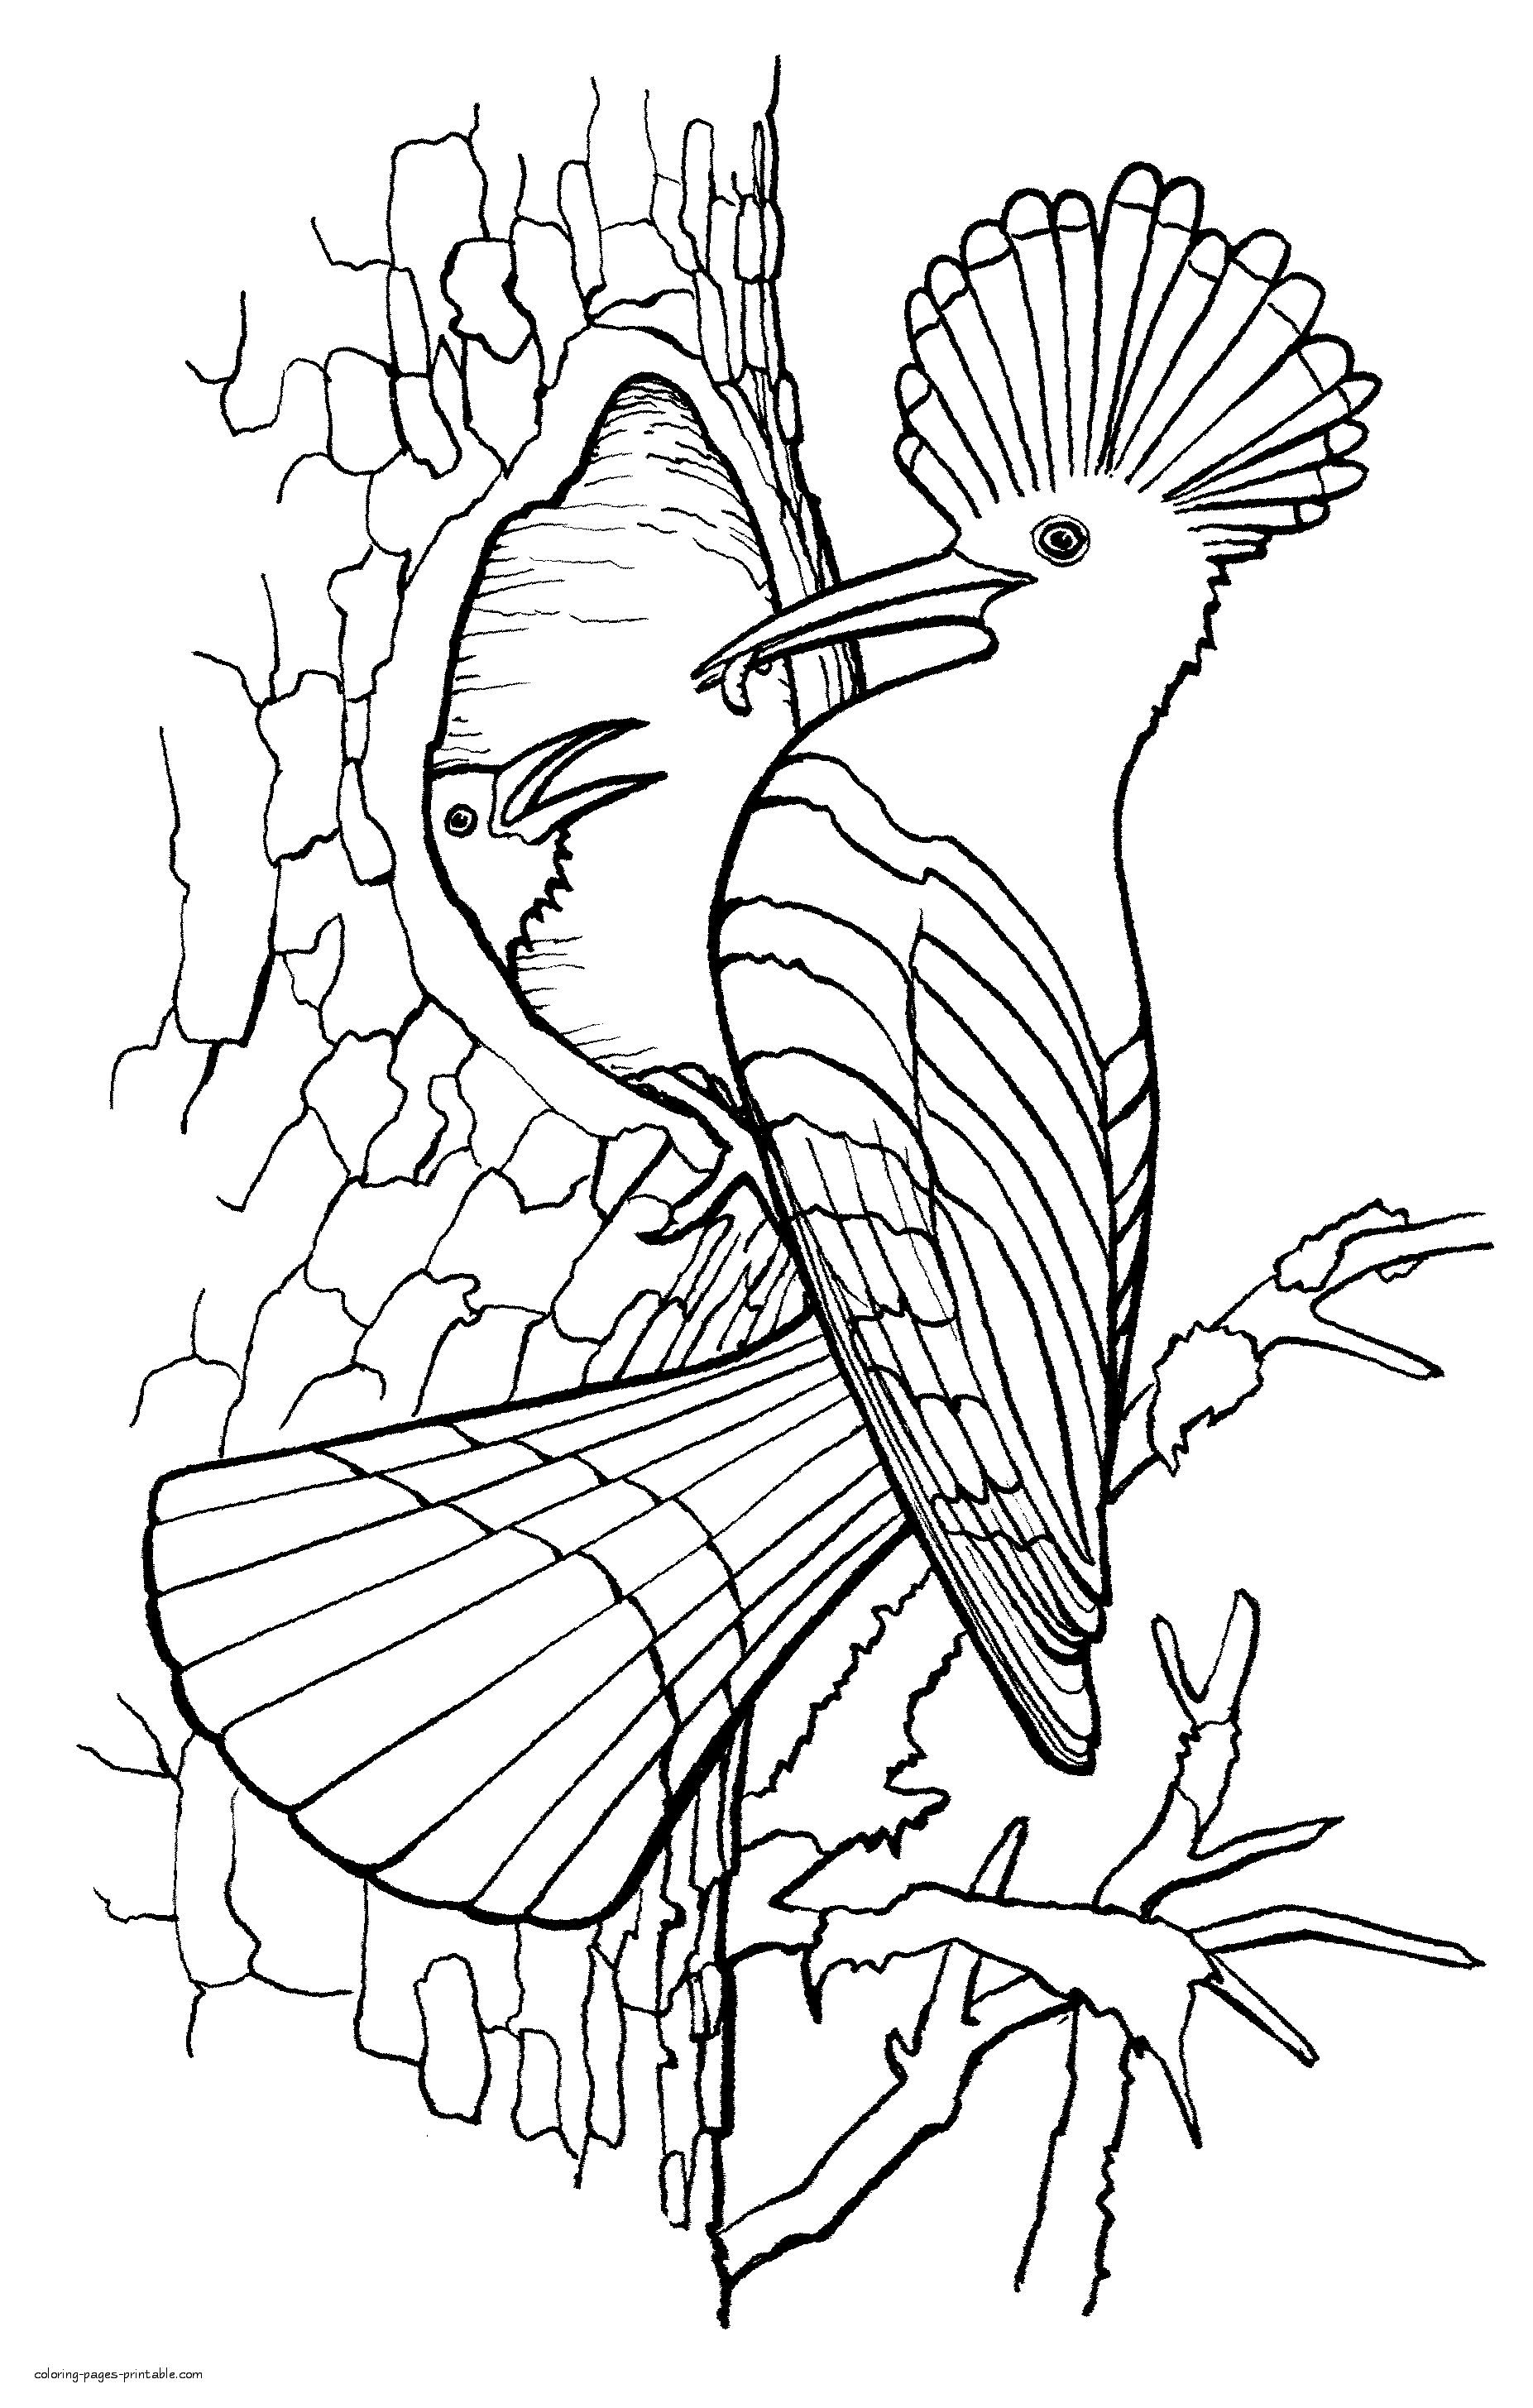 Coloring Pages Of Birds For Adults. Hoopoe || COLORING-PAGES-PRINTABLE.COM